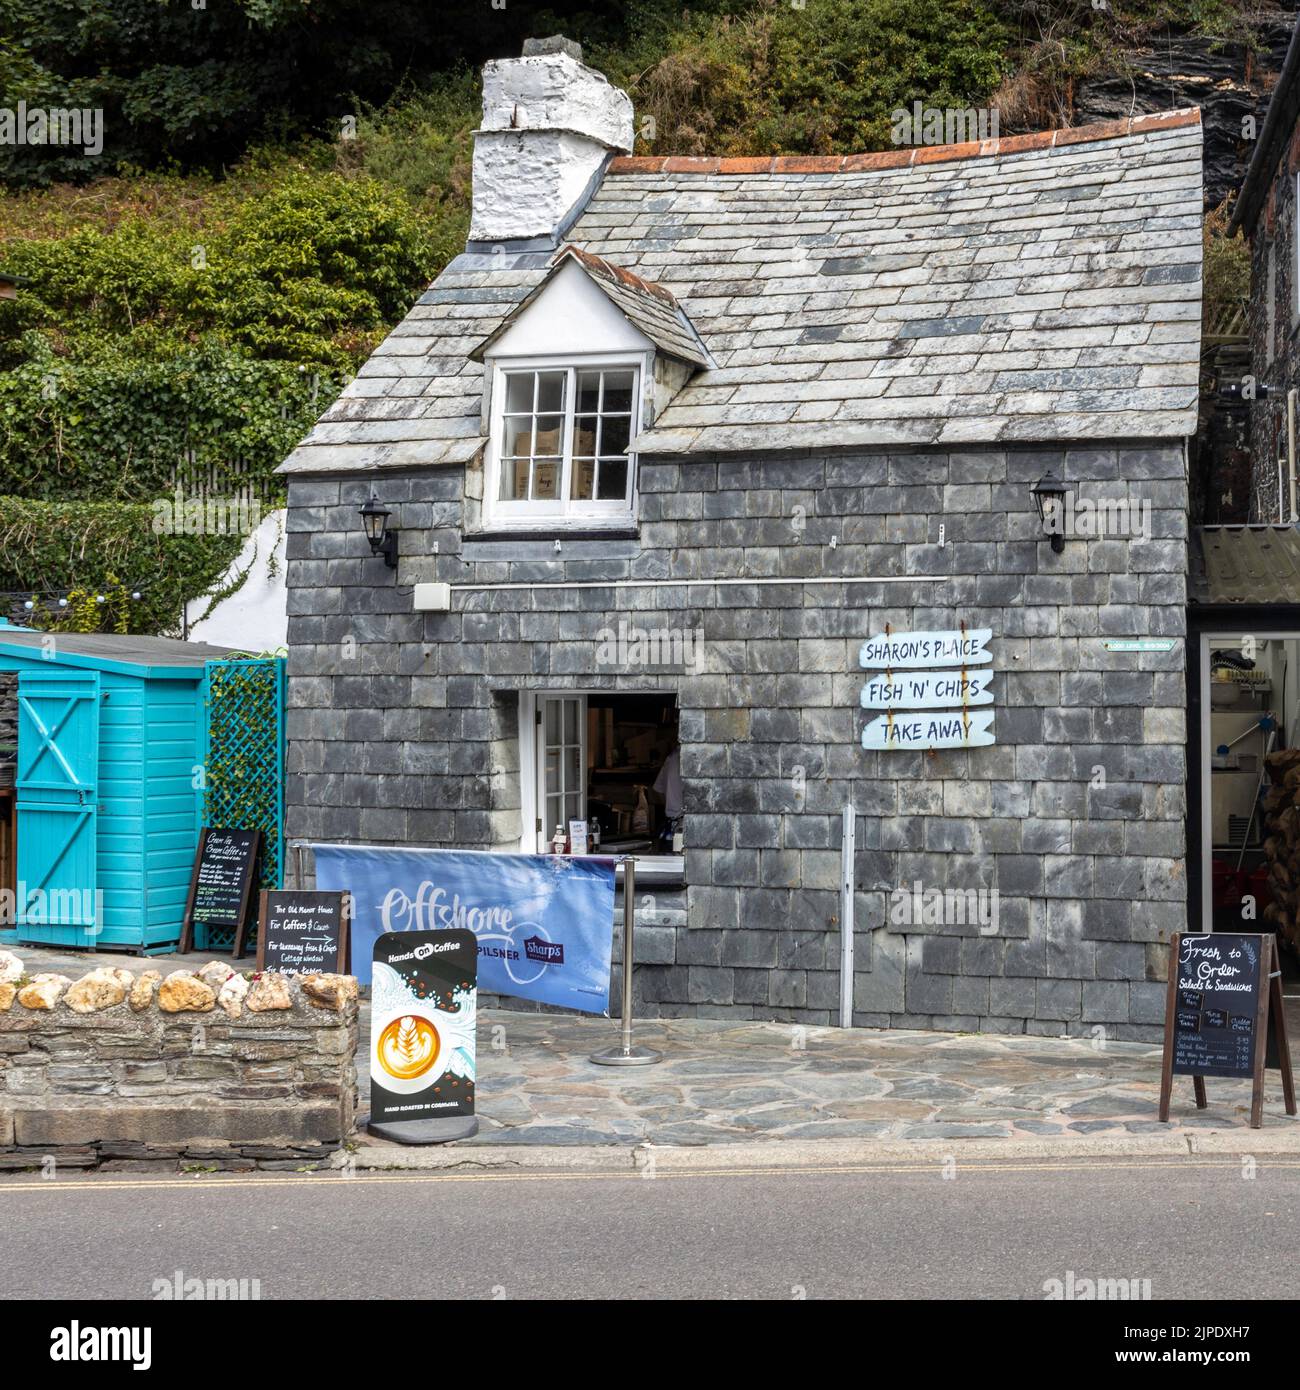 Fish 'n' Chips Take Away shop - Sharon's Plaice - in Boscastle, Cornwall Stock Photo